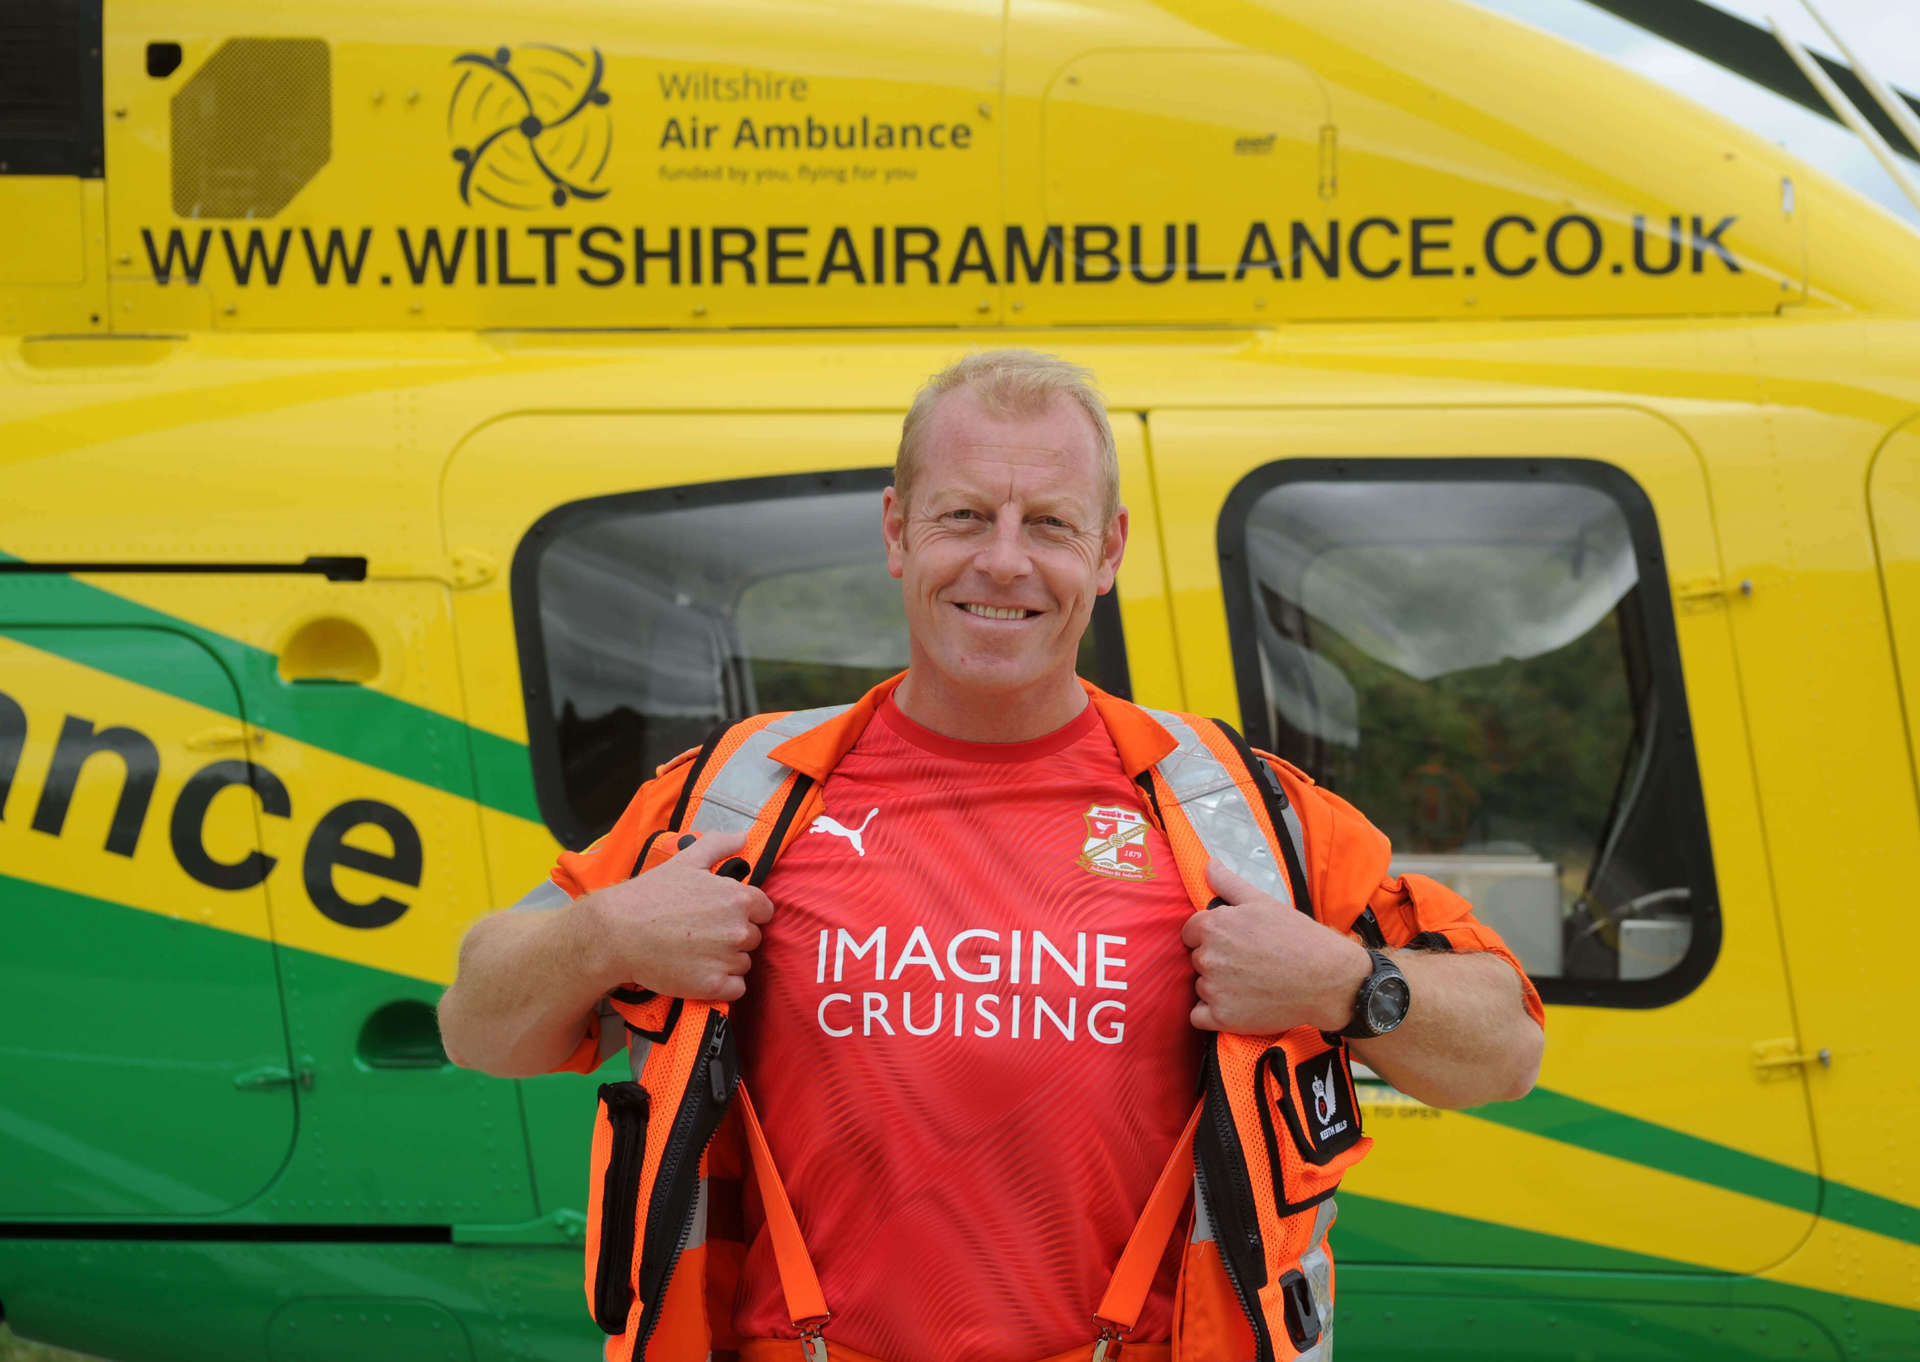 Critical care paramedic wearing a flight suit and Swindon Town Football shirt underneath stood in front of the Bell-429 helicopter.